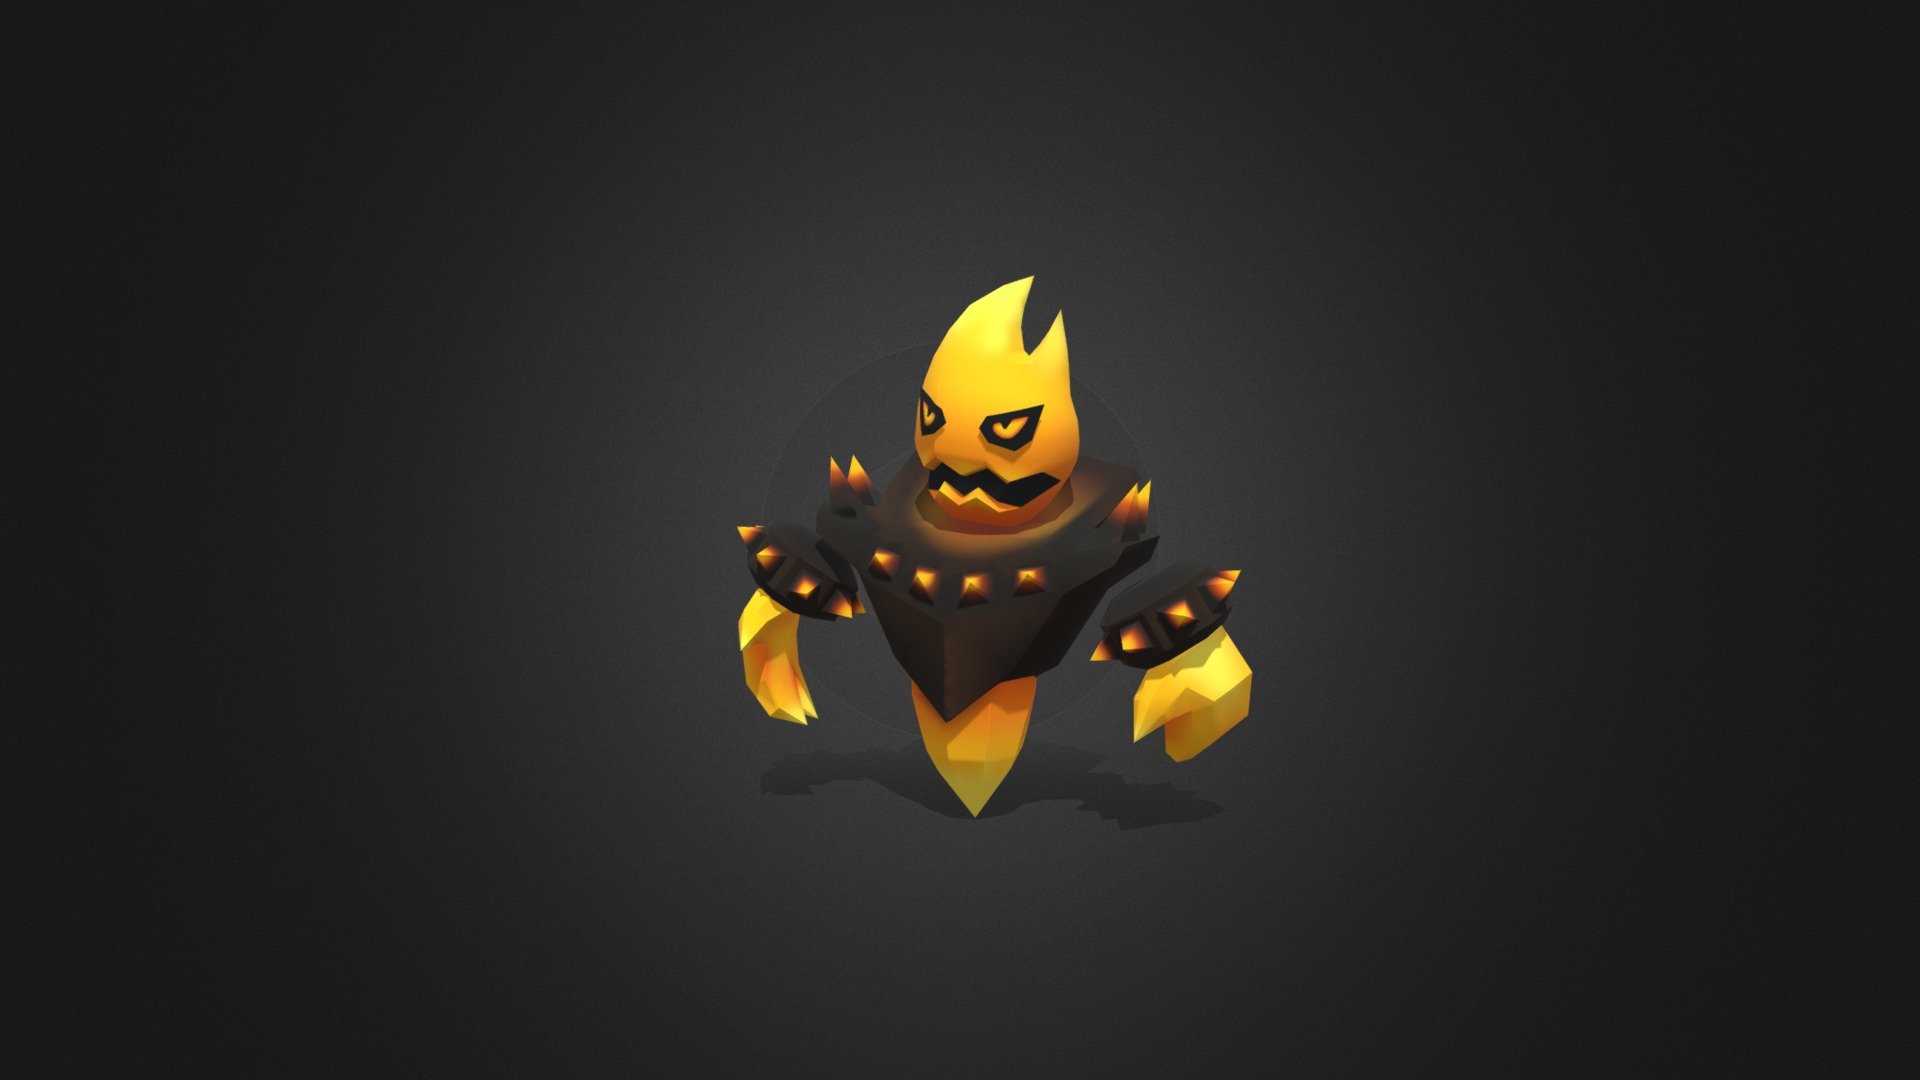 Friendly mobile animated low poly fire enemies pack. Unique models of vehicles with original textures are perfect for your game of any type. High-quality 3D models and prepared prefabs with materials 3d model